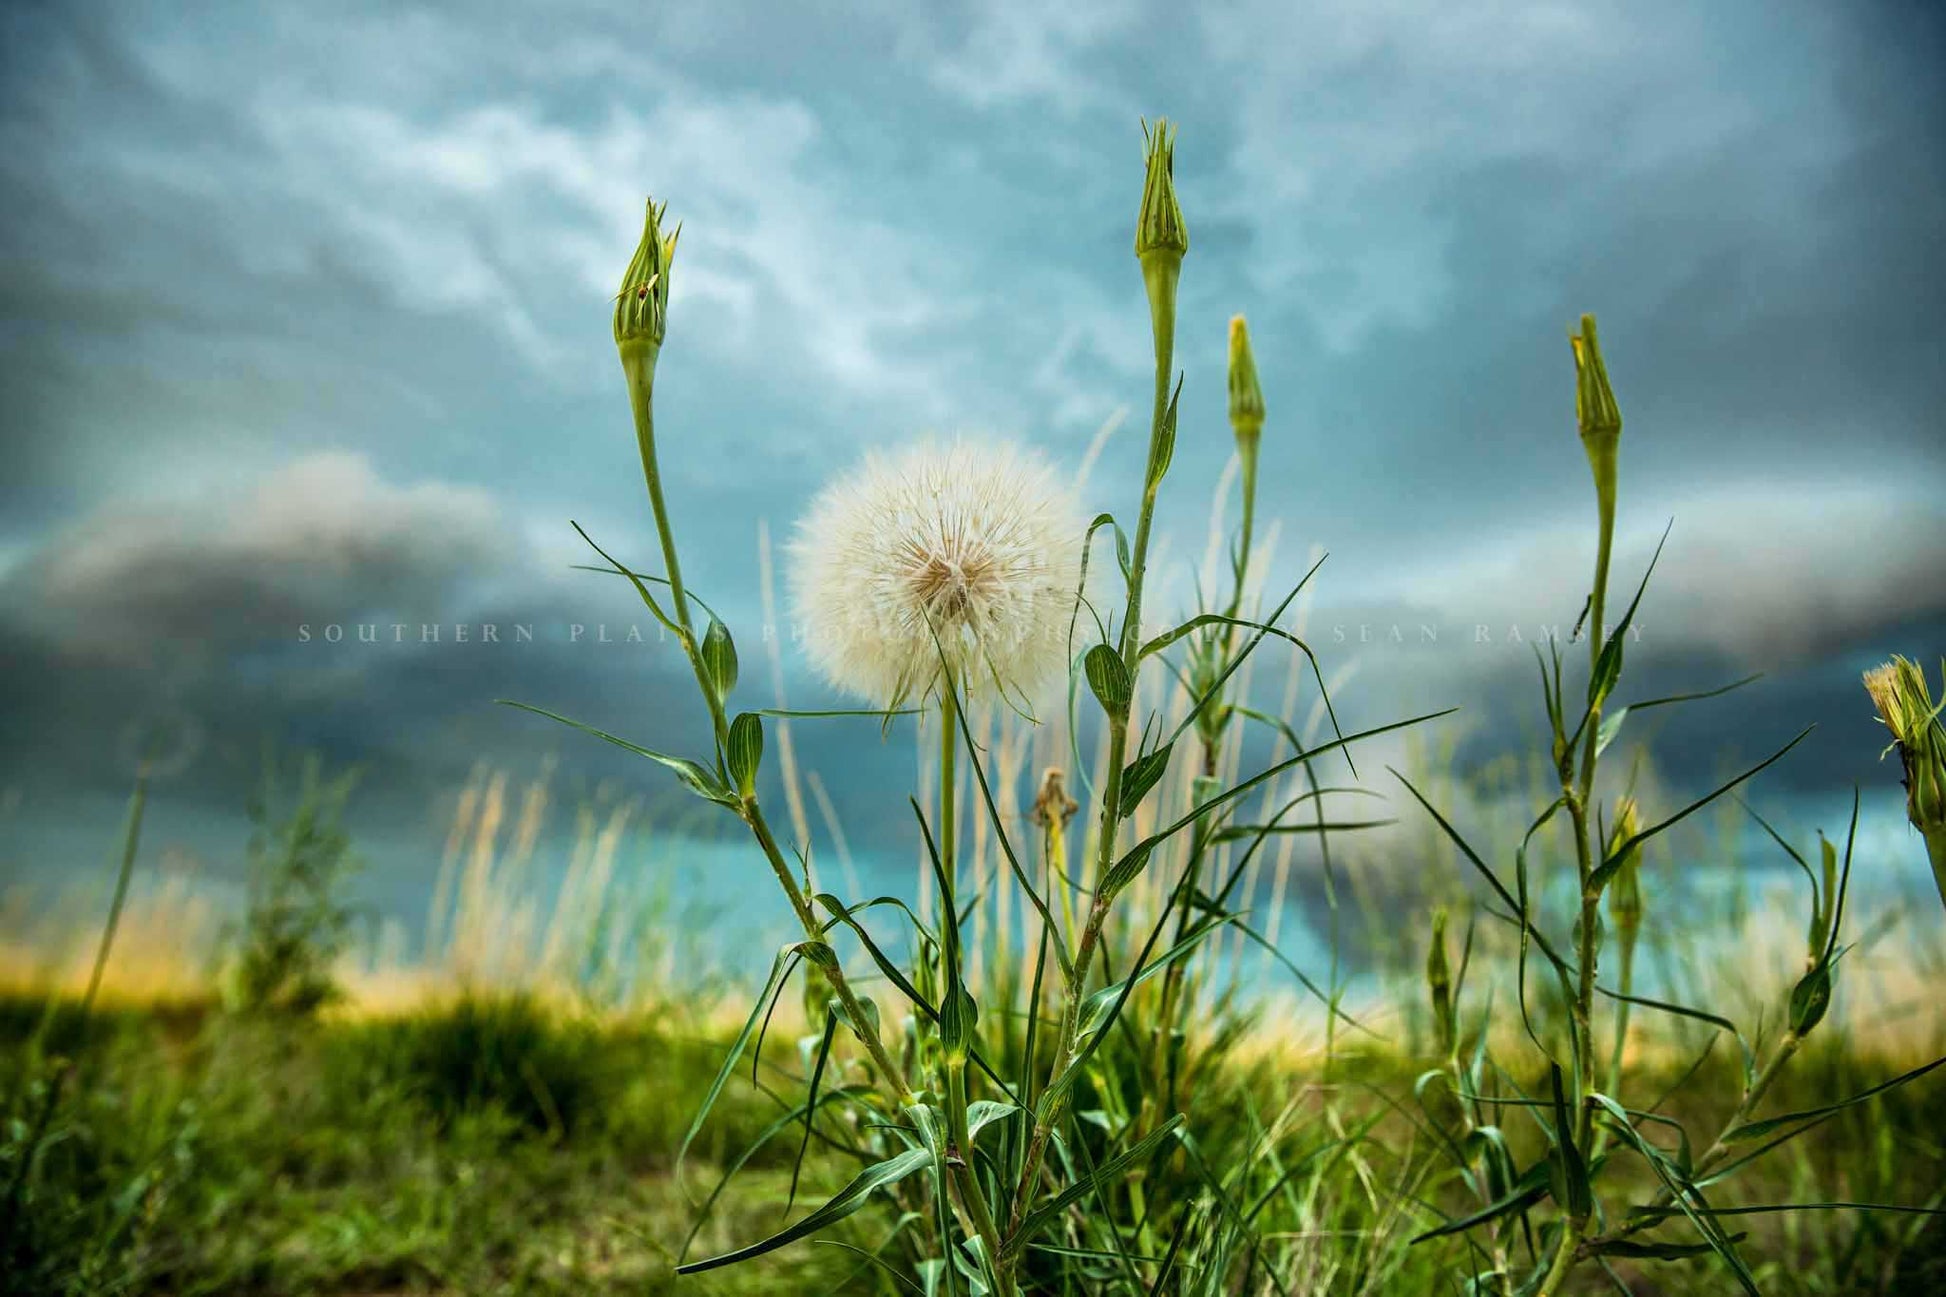 Humorous botanical photography print of a large dandelion appearing to raise arms in air as a storm approaches on a stormy spring day on the plains of Colorado by Sean Ramsey of Southern Plains Photography.